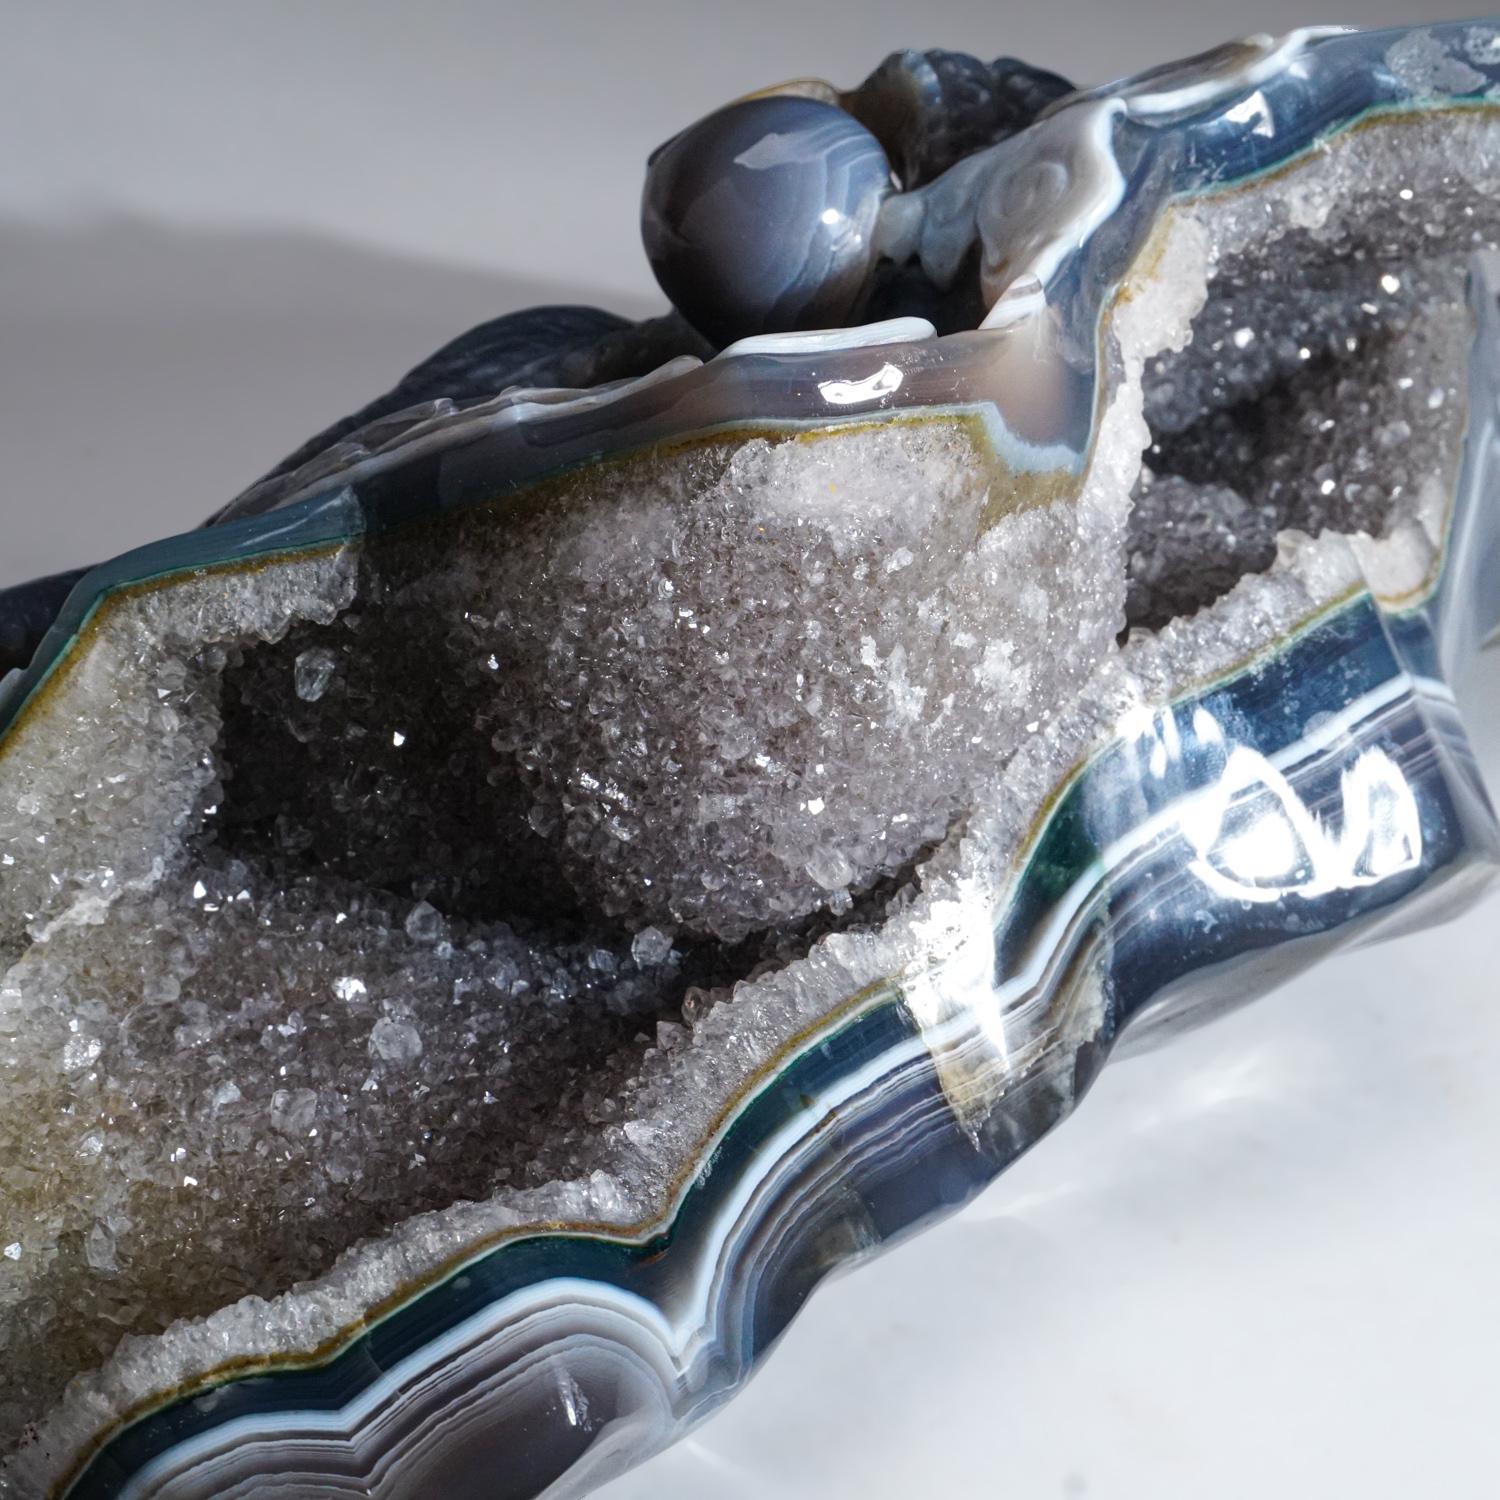 The German artisan of this piece used this gem quality, banded agate to truly highlight the quality of the stone. Carved from a single piece of incredibly transparent banded agate (sourced in Uruguay), the variation in color creates spectacular